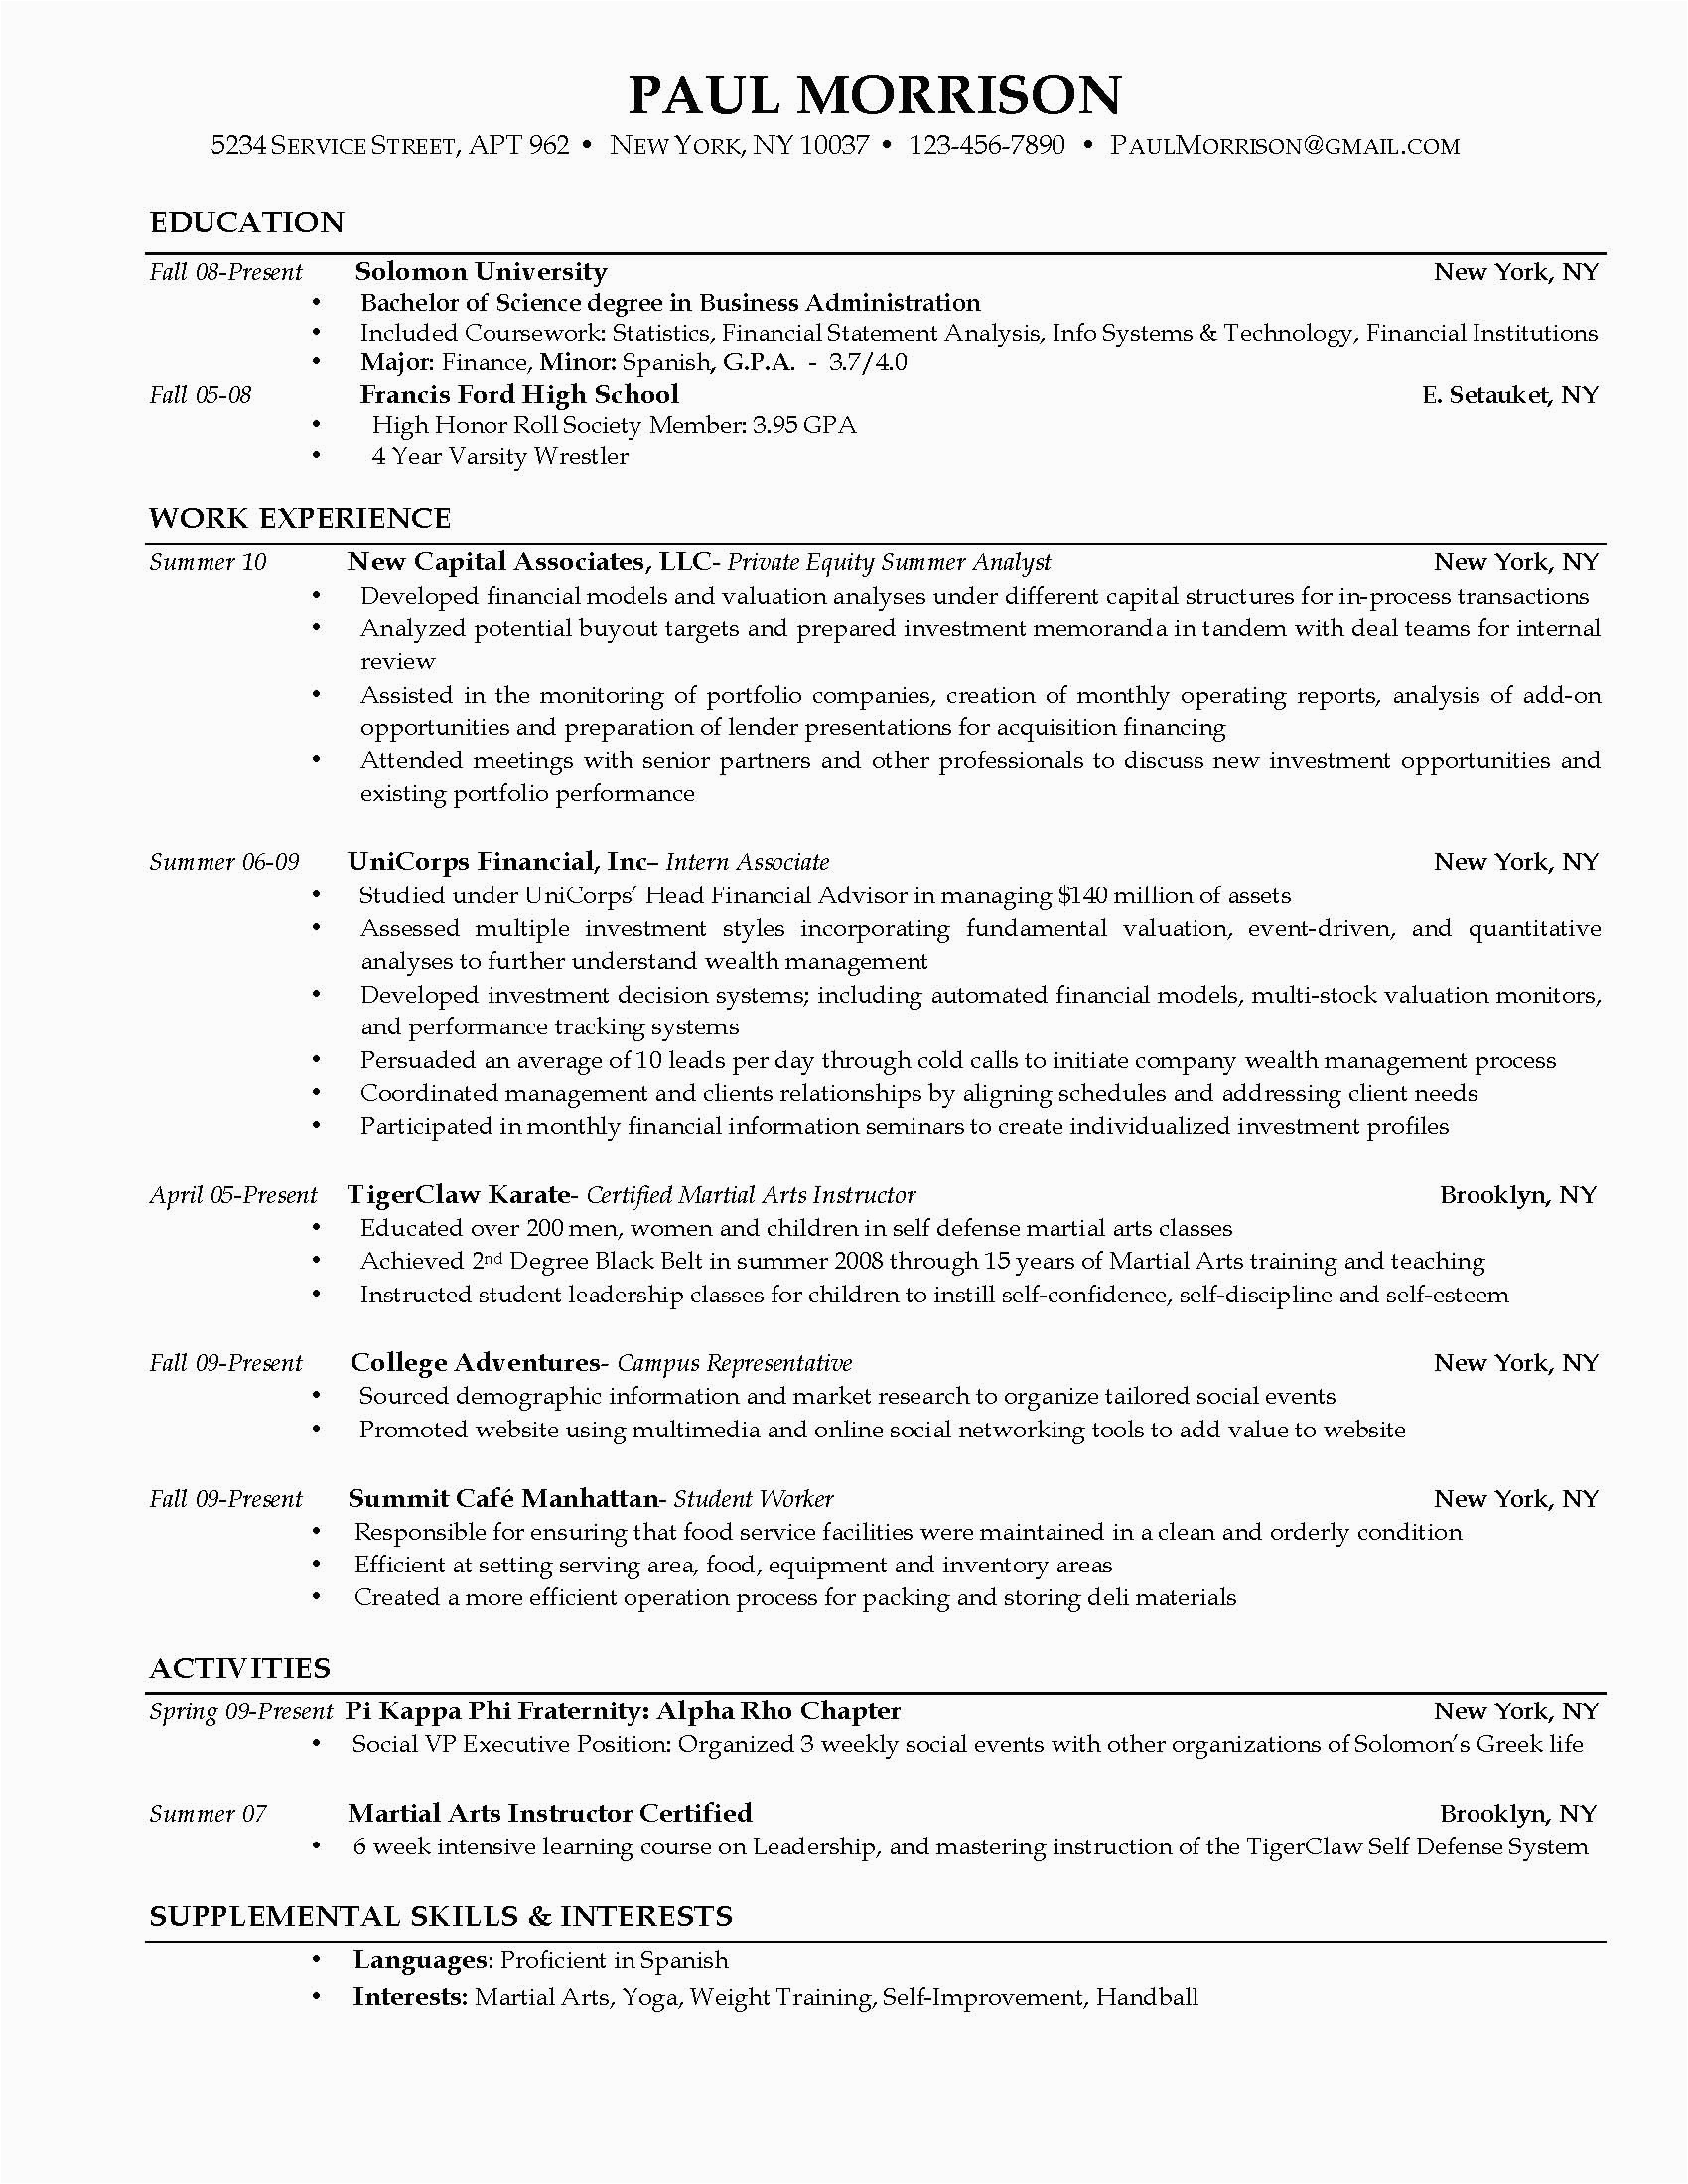 Sample Resume Objective Statements for College Students Current College Student Resume